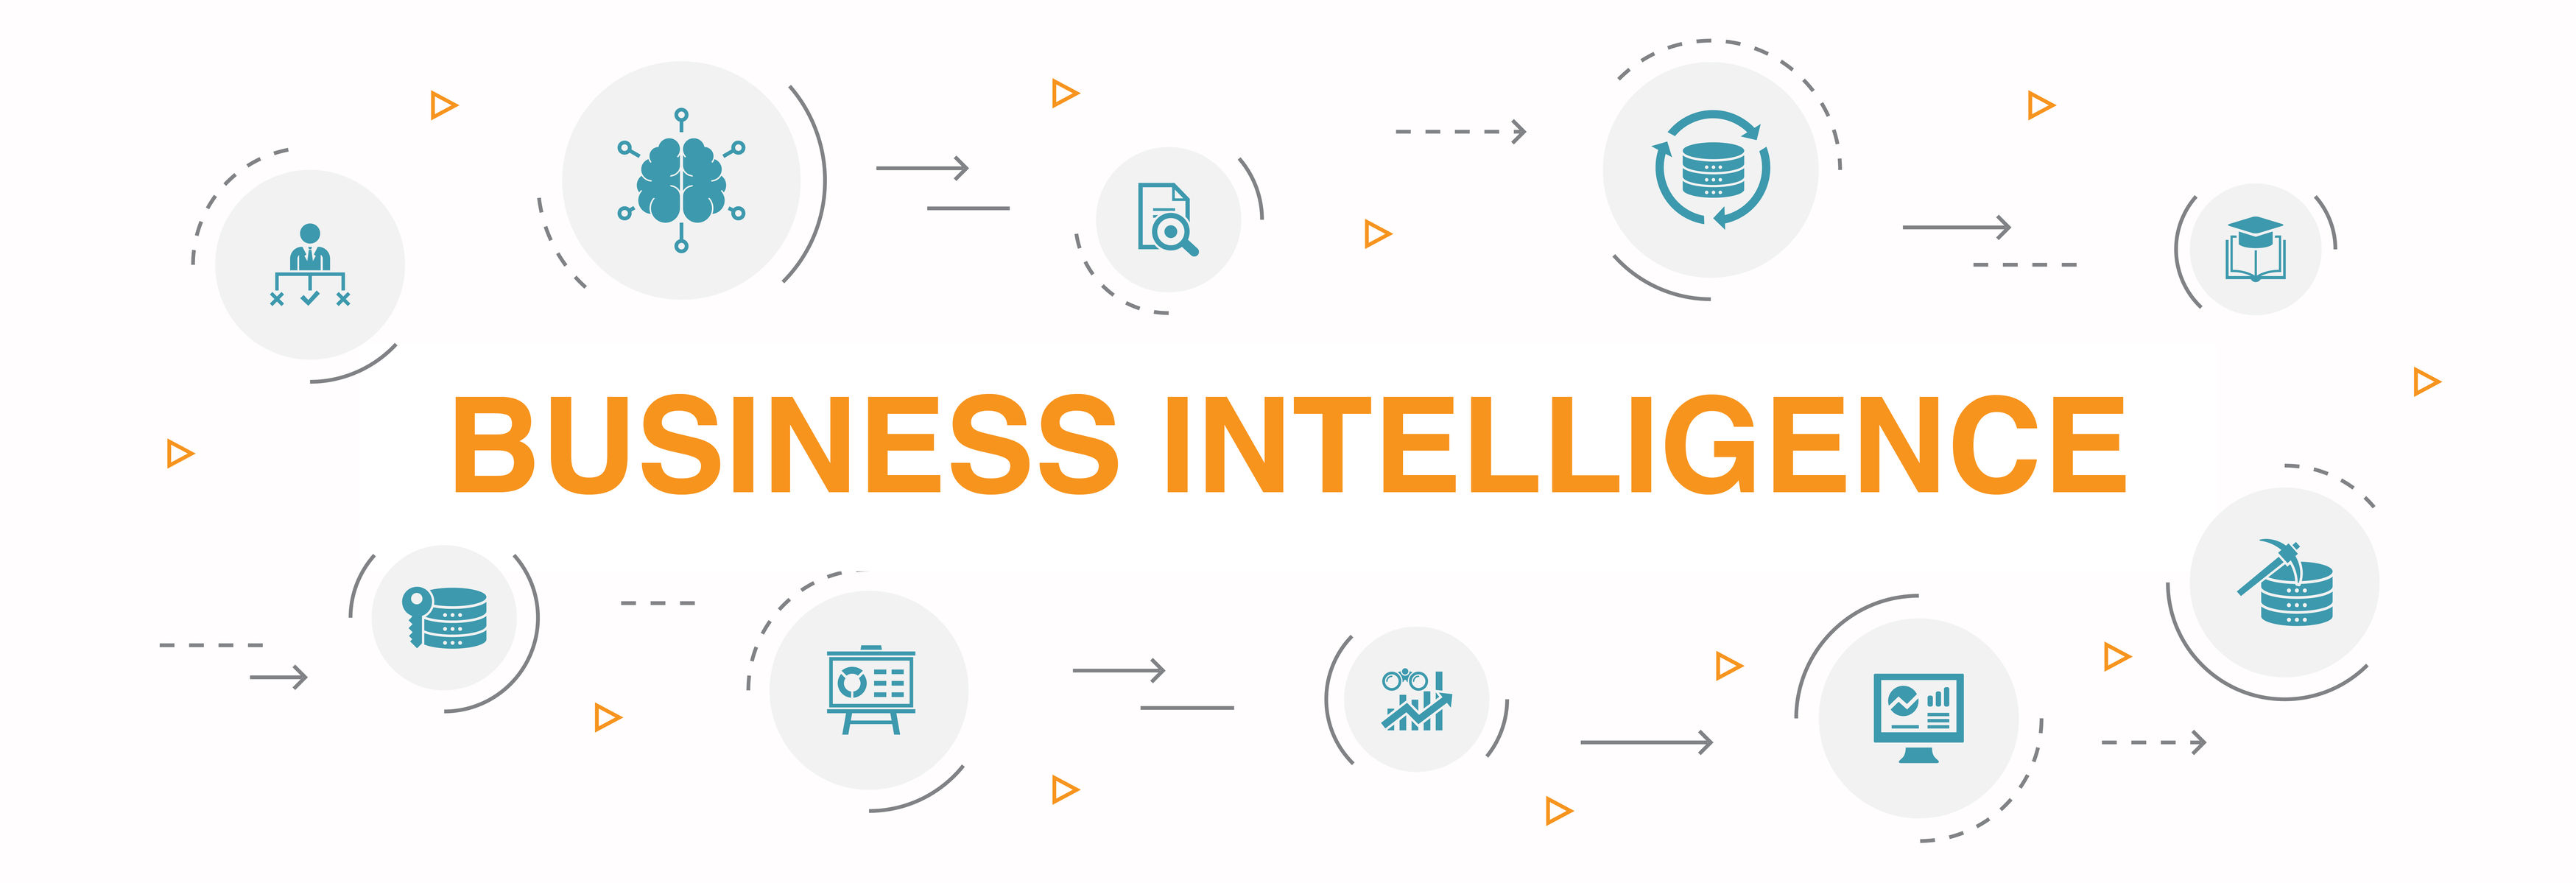 Business Intelligence by design